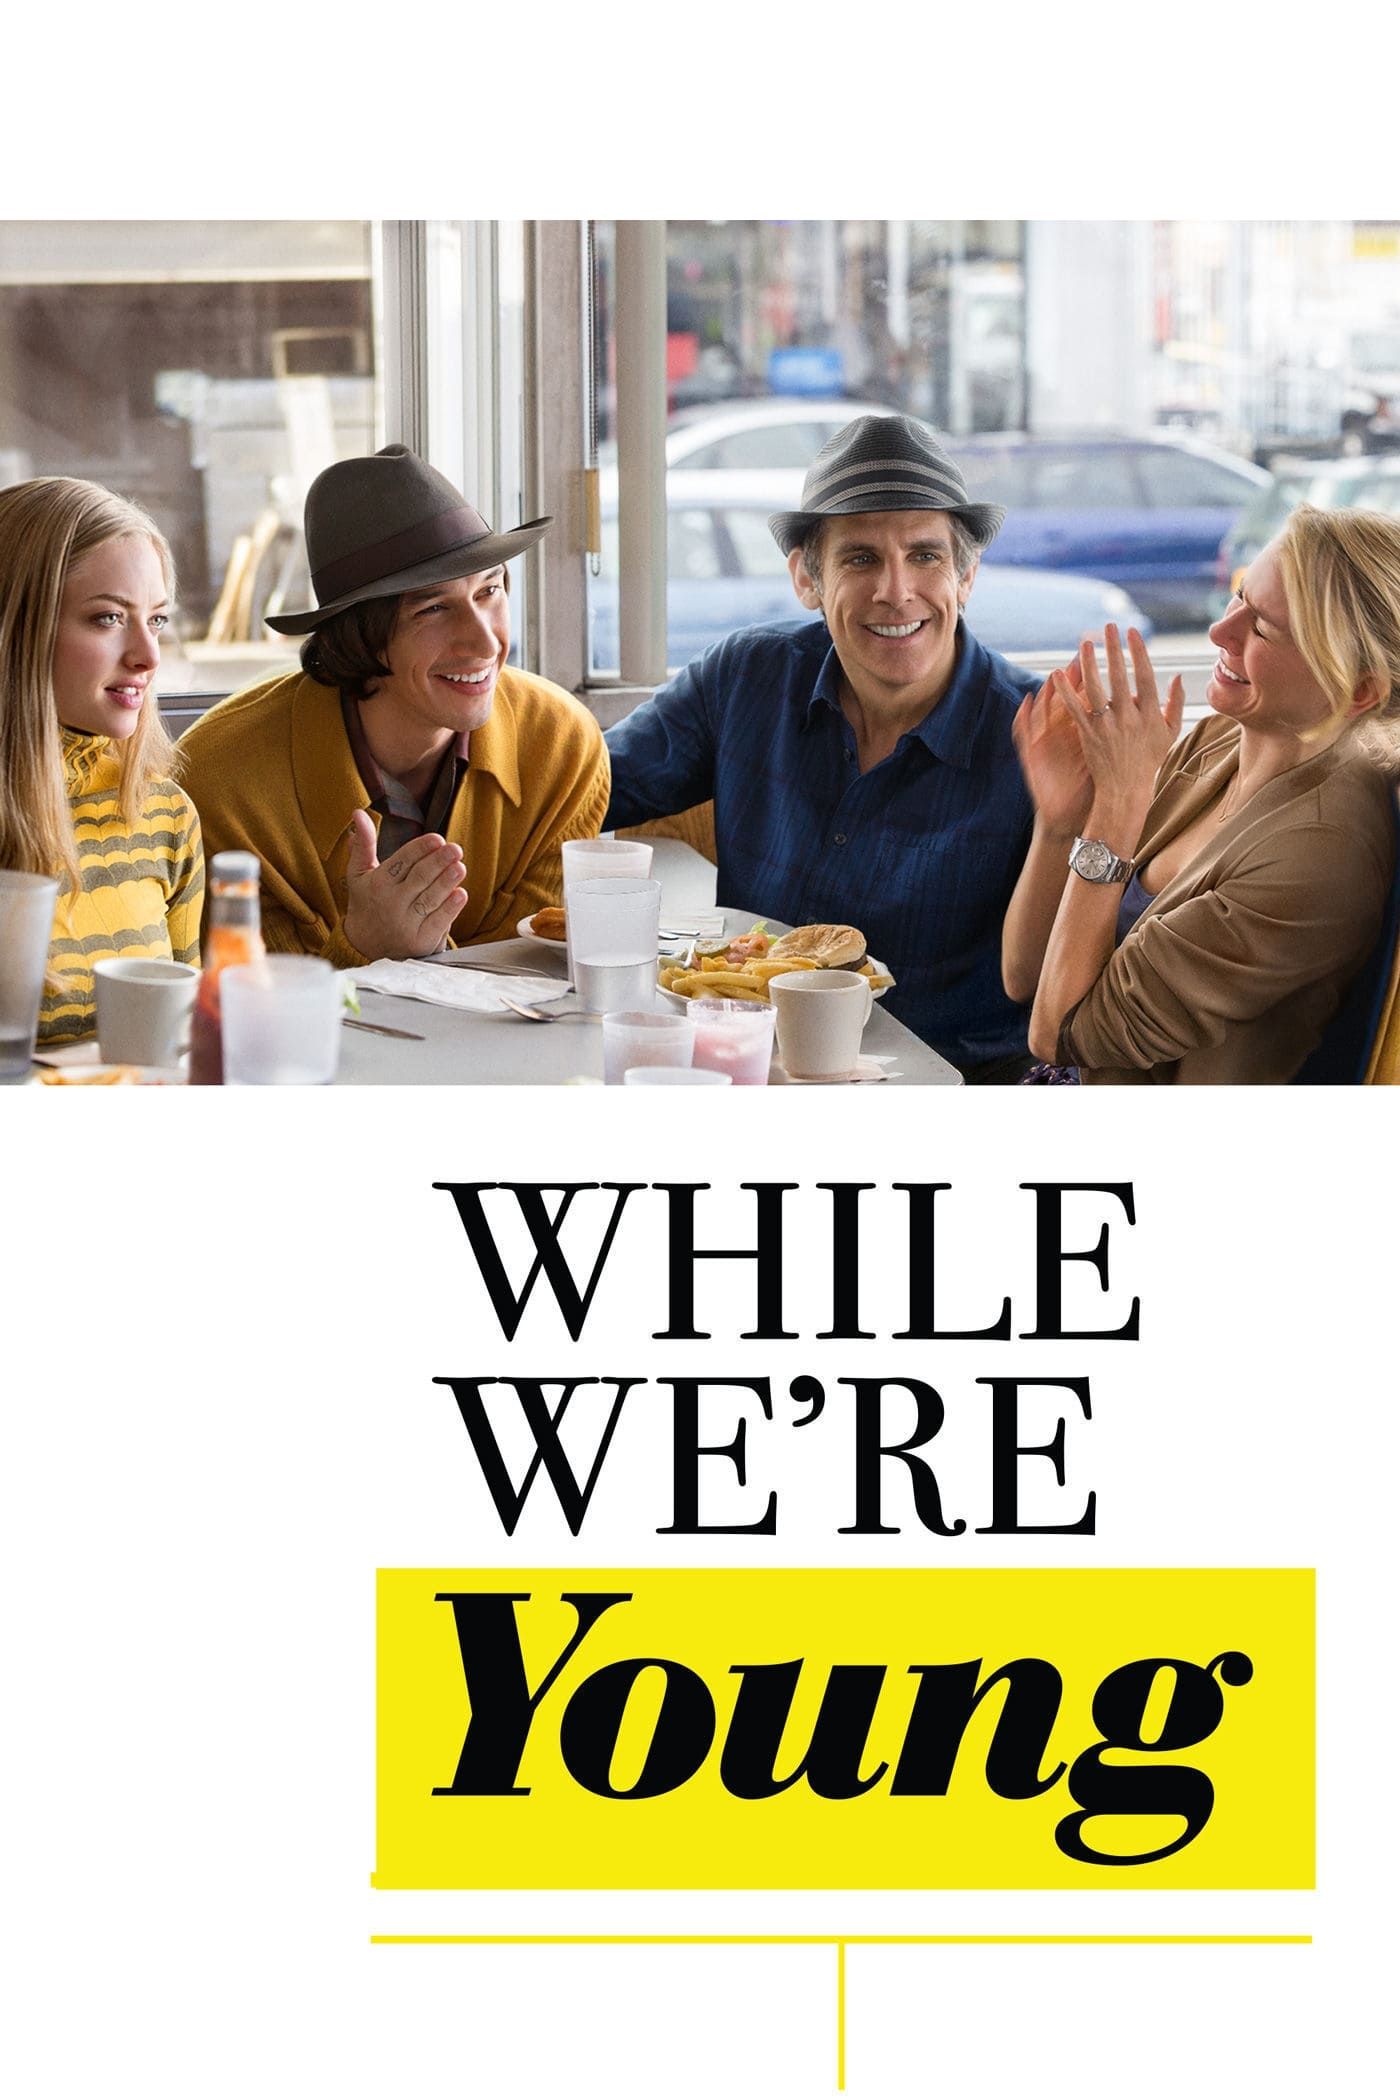 While Were Young